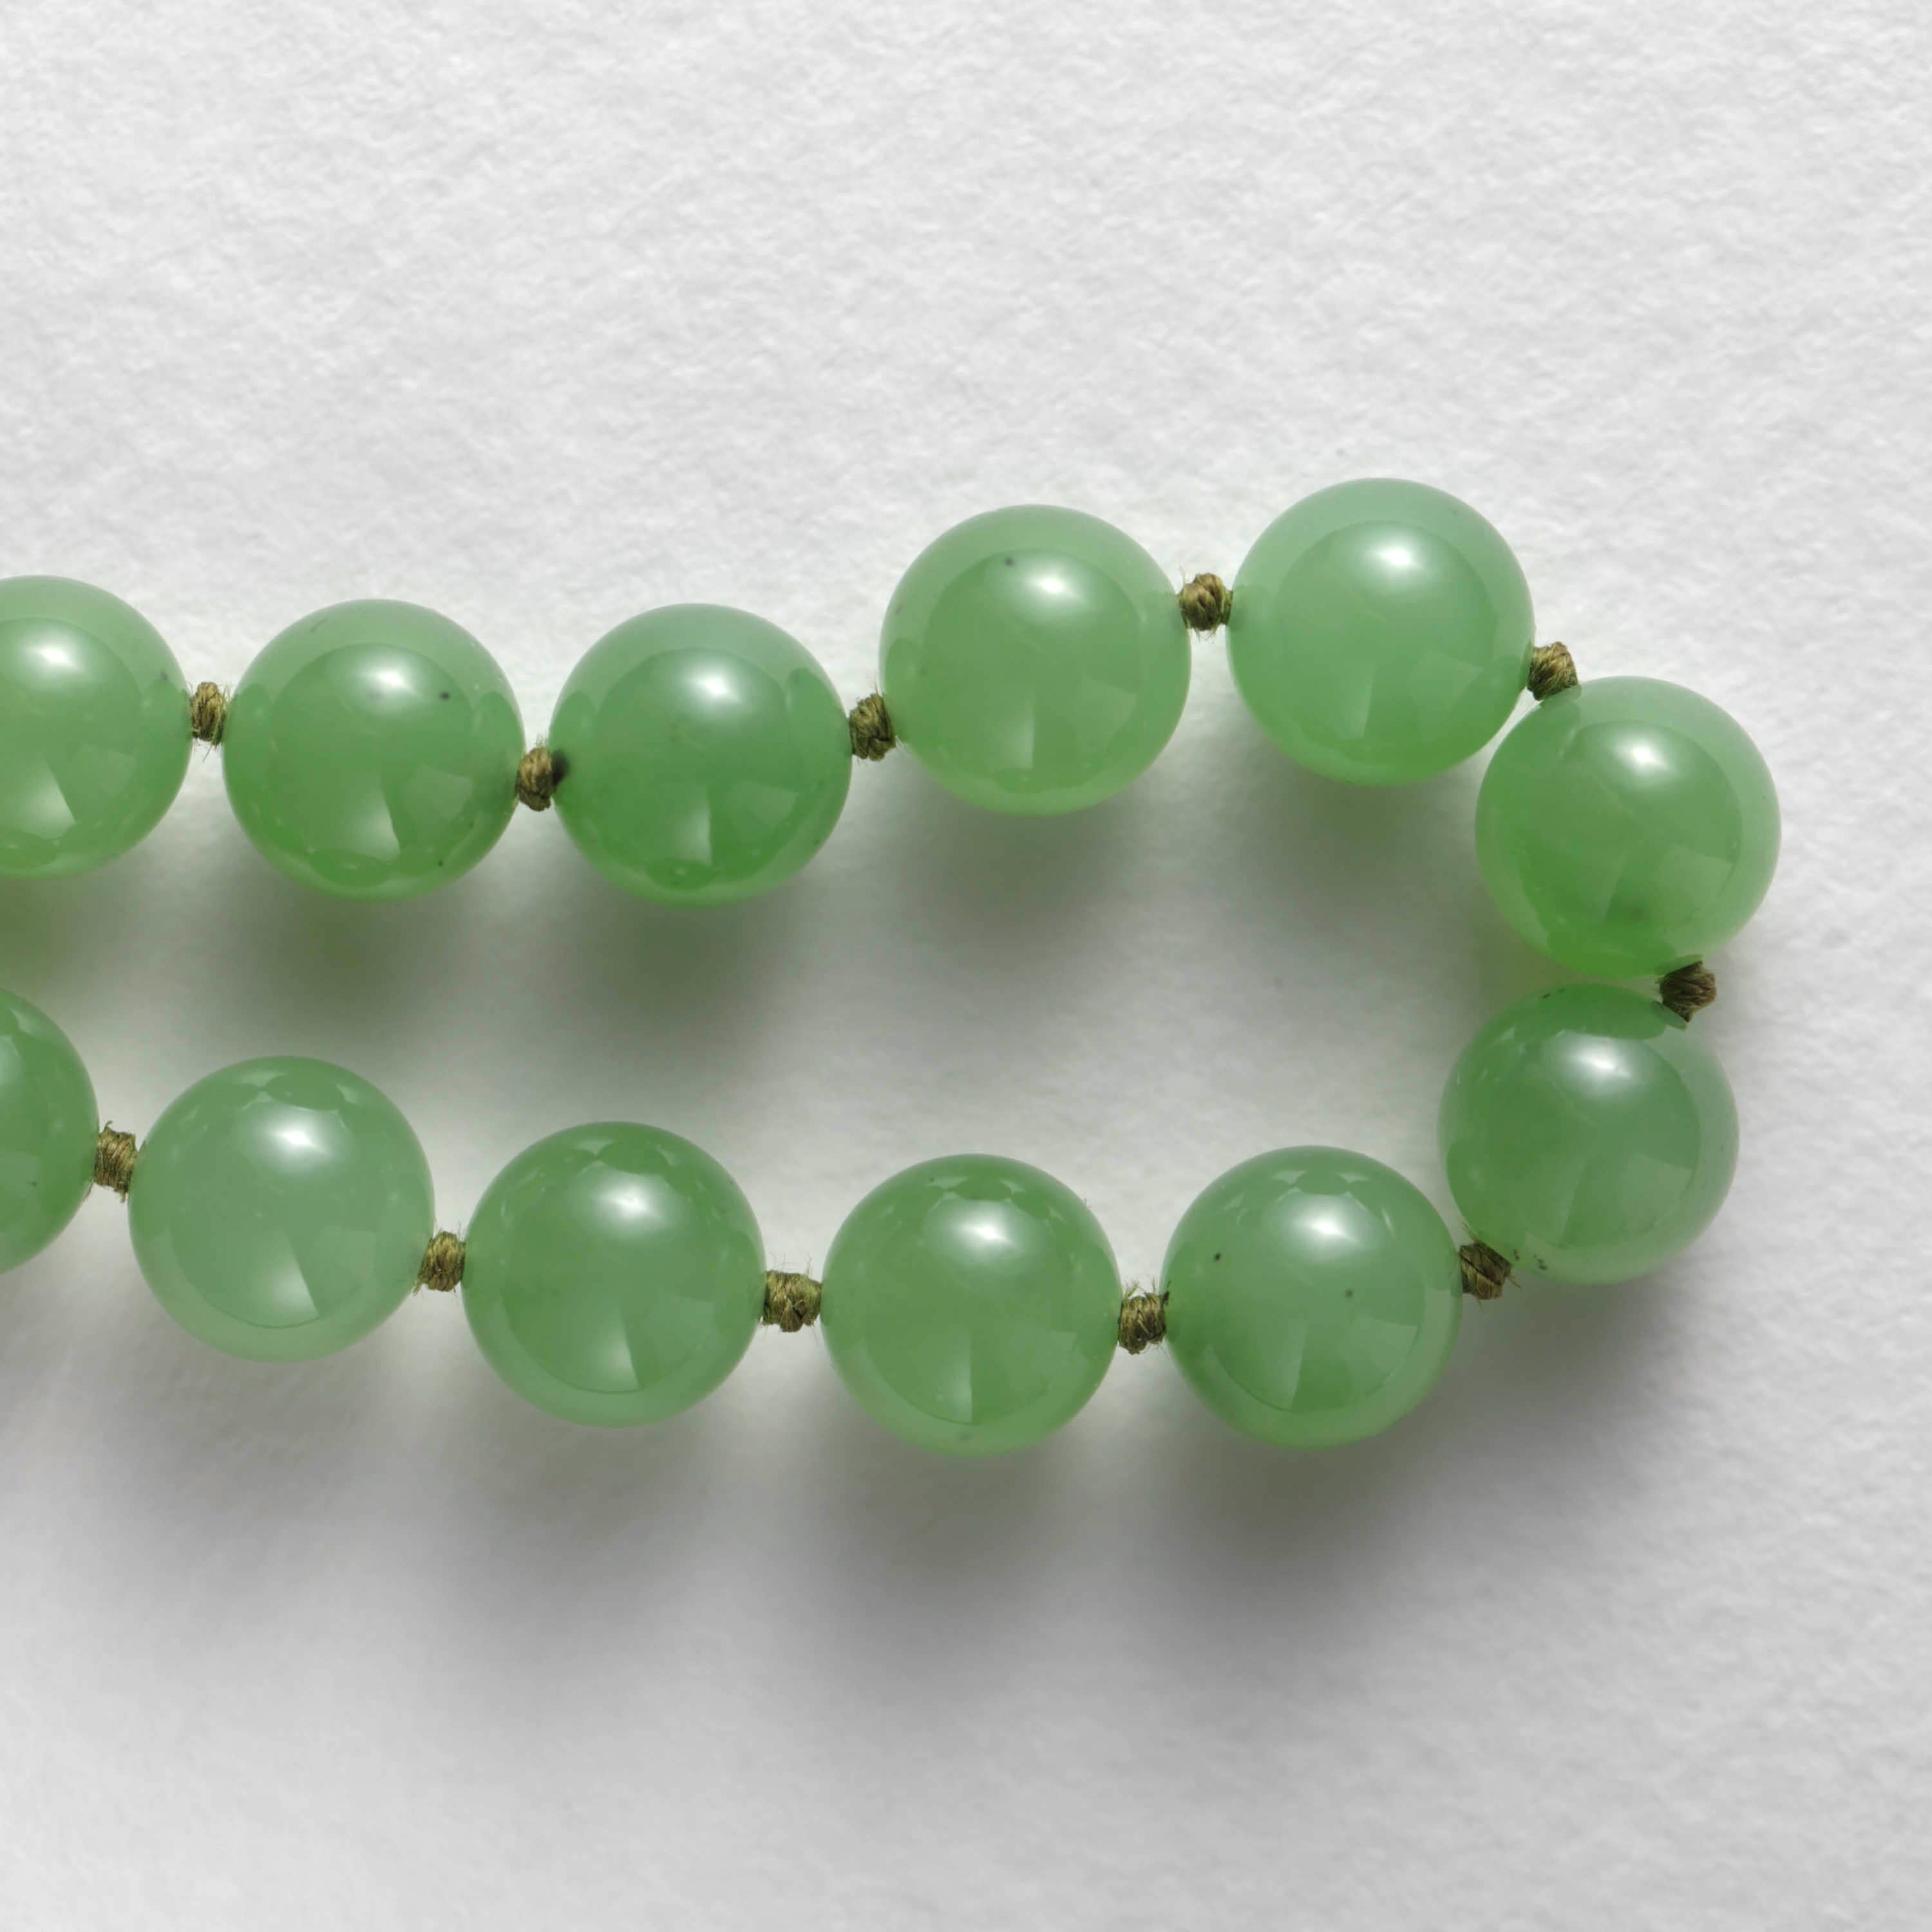 Women's or Men's Rare Gump's Jade Necklace, Impossibly Translucent Nephrite 16 ¾